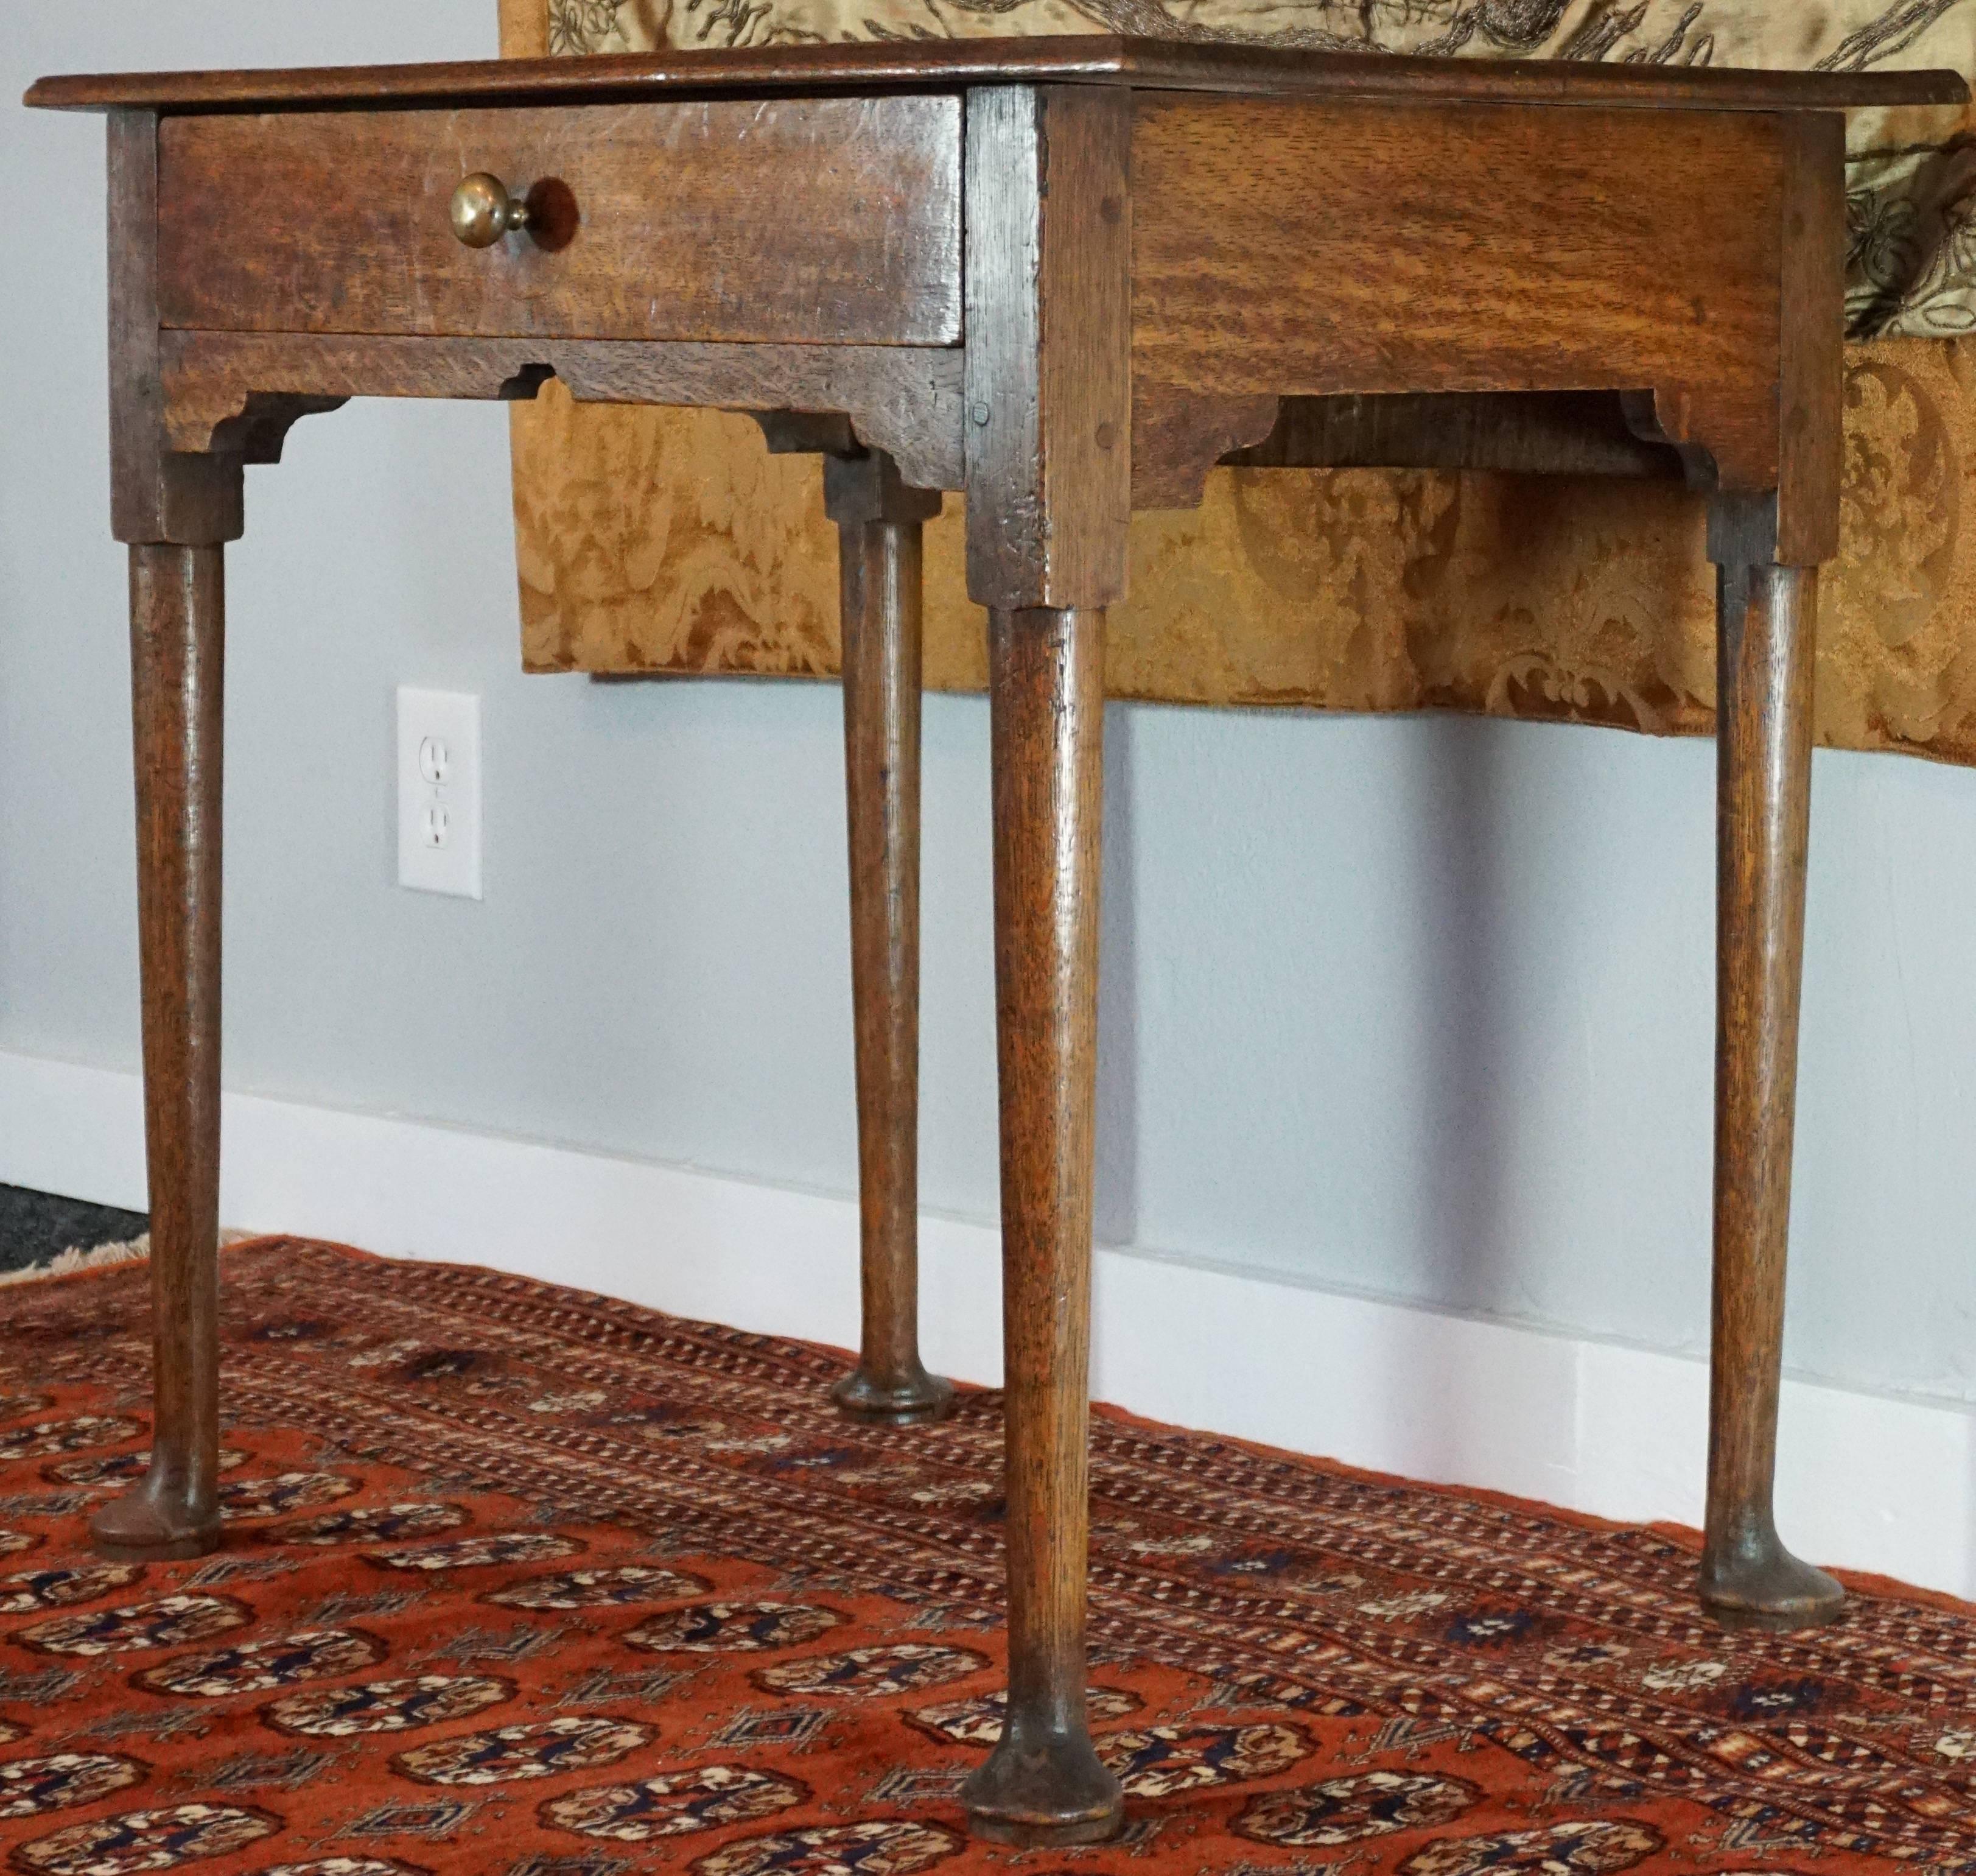 Queen Anne period 18th century oak side table lowboy with two plank top, one drawer over apron and signature cabriole feet. A true classic and quite elegant!

Measurements
Height 27 inches
Width 30 inches
Depth 20 inches.

Condition: Very good